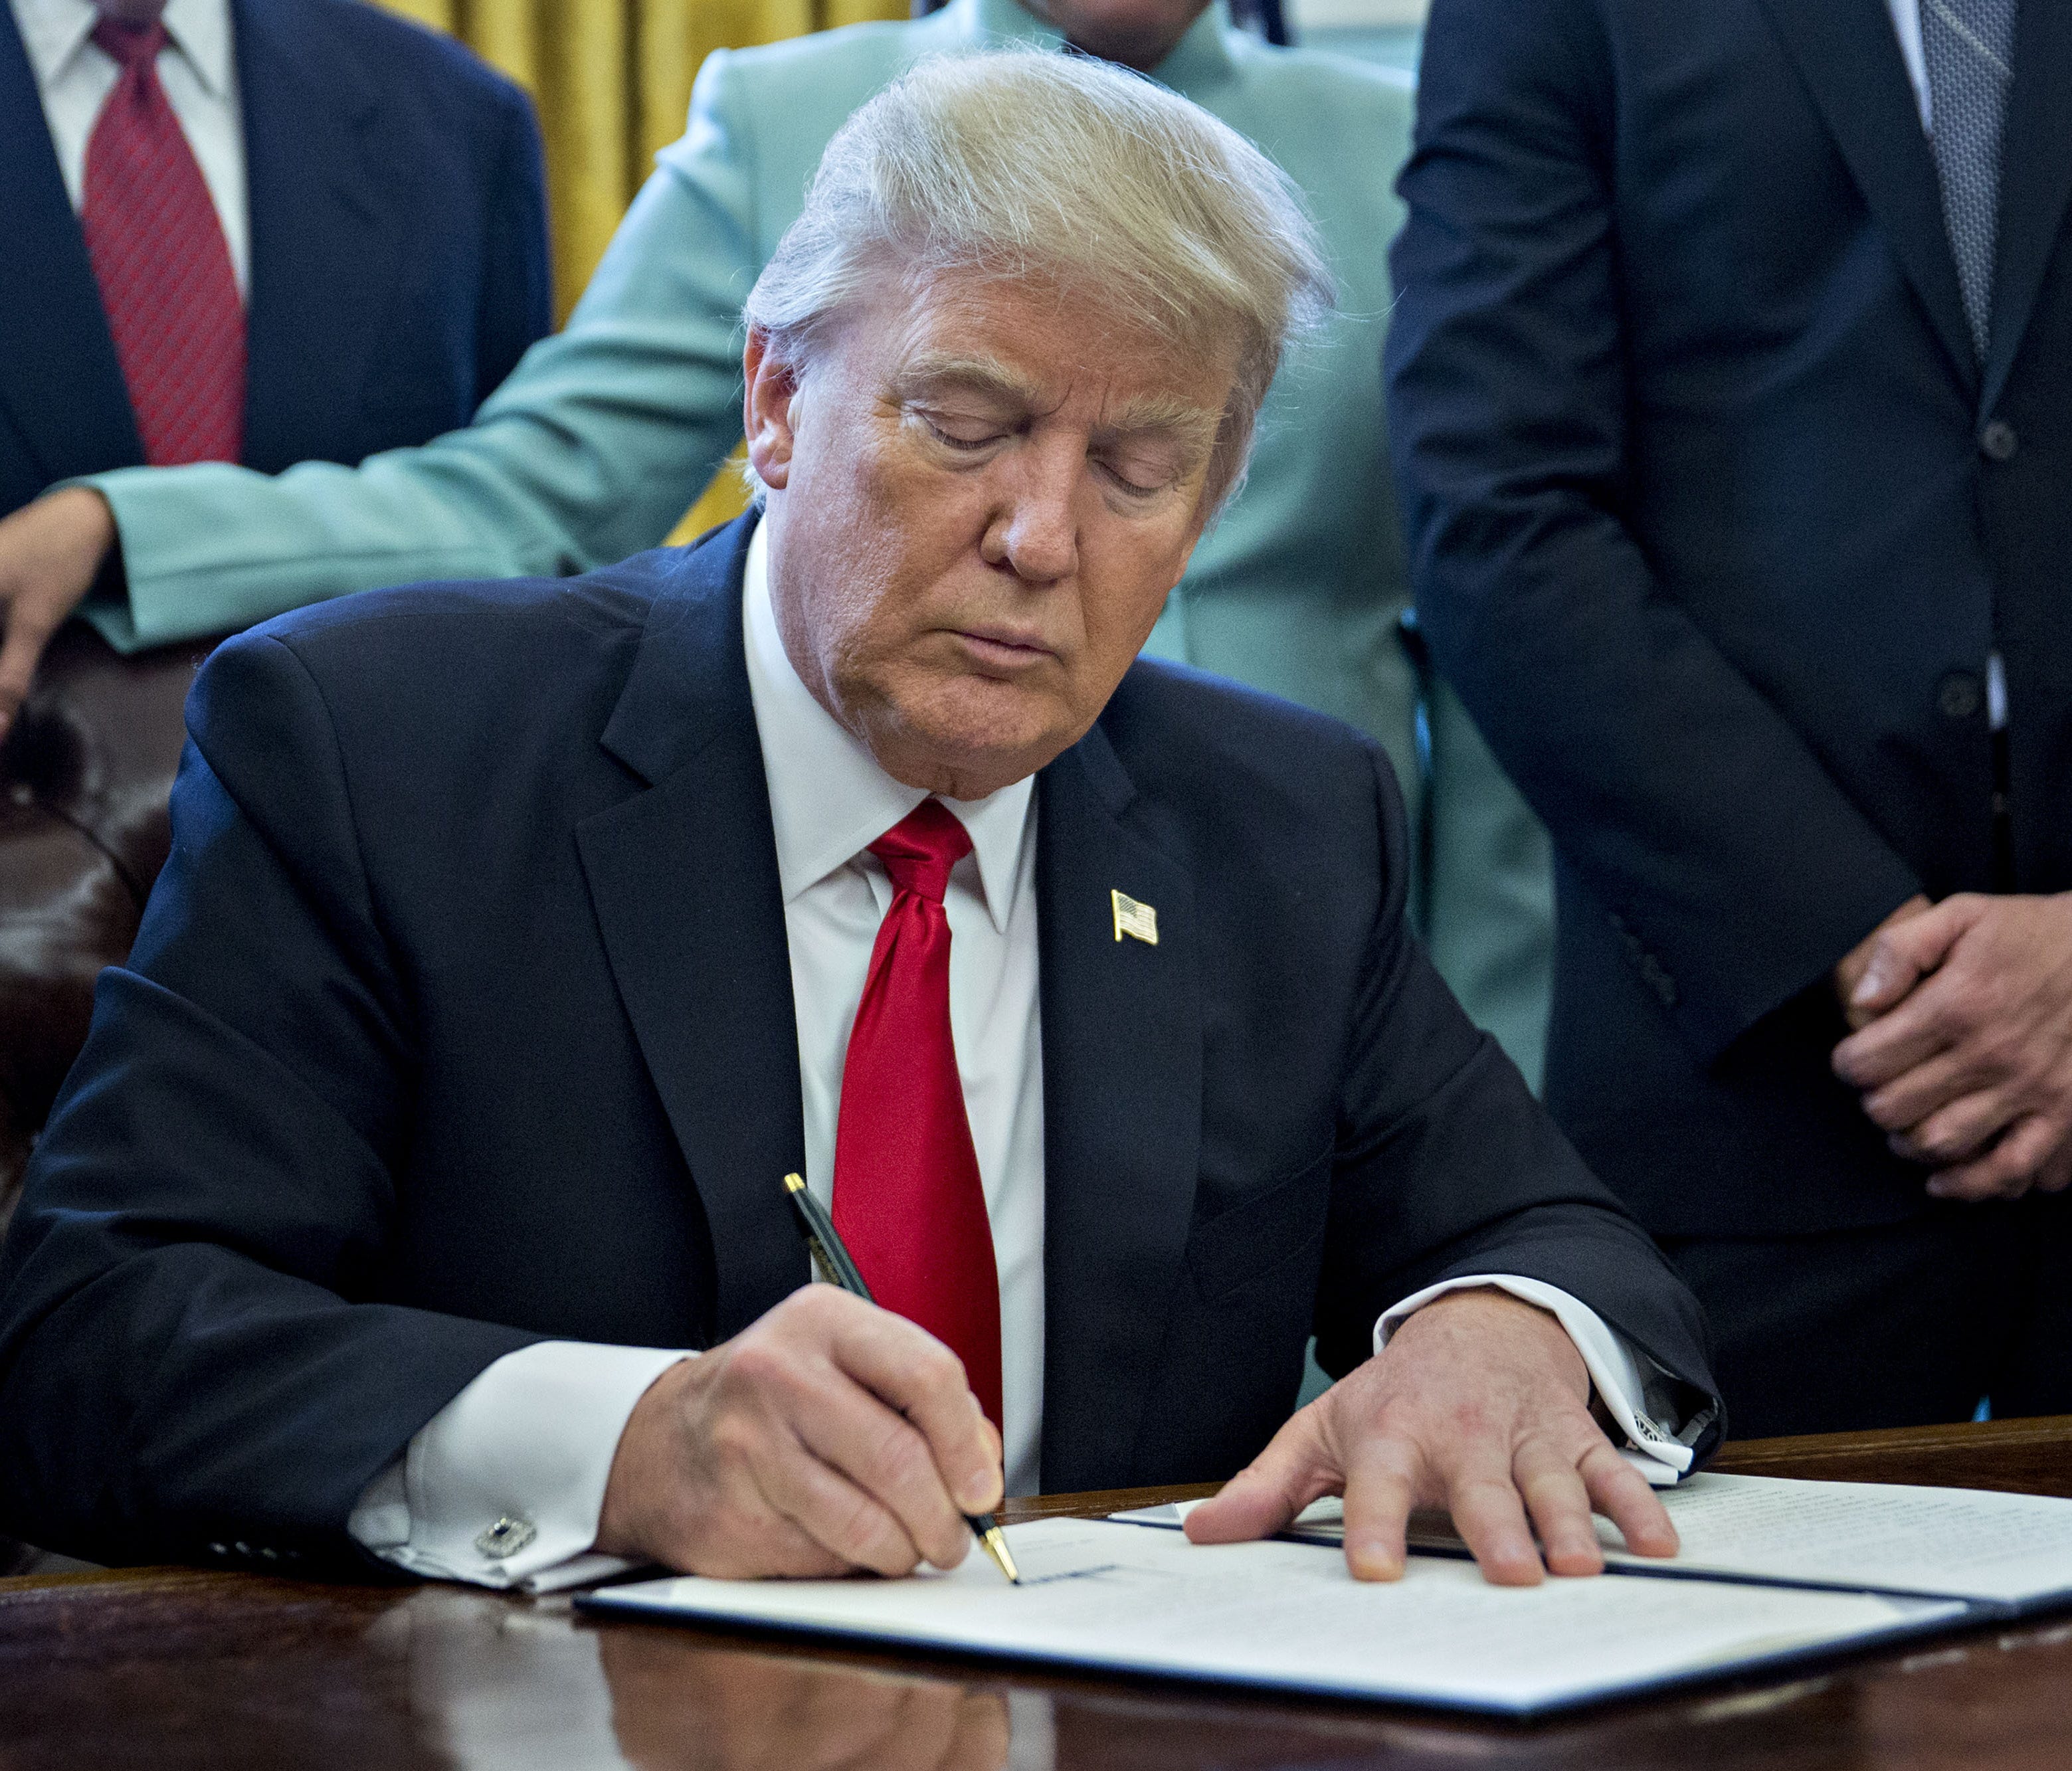 President Donald Trump signs an executive order in the Oval Office of the White House surrounded by small business leaders Monday.